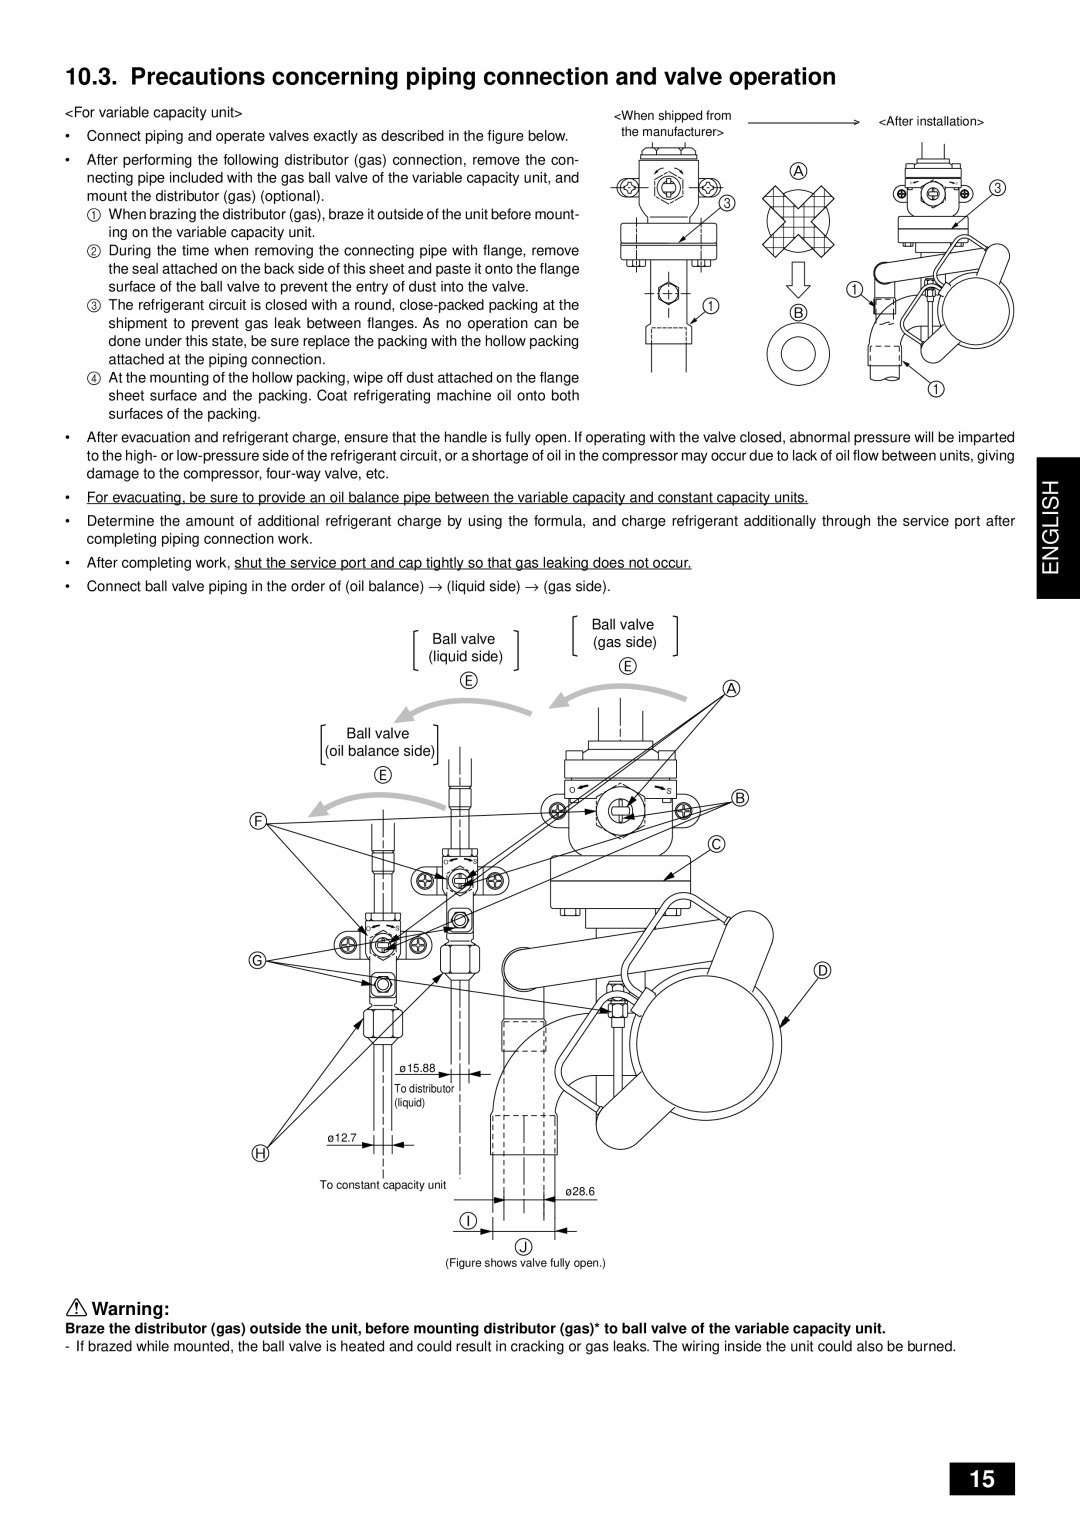 Mitsubishi Electronics PUHY-YMC Precautions concerning piping connection and valve operation, English, the manufacturer 